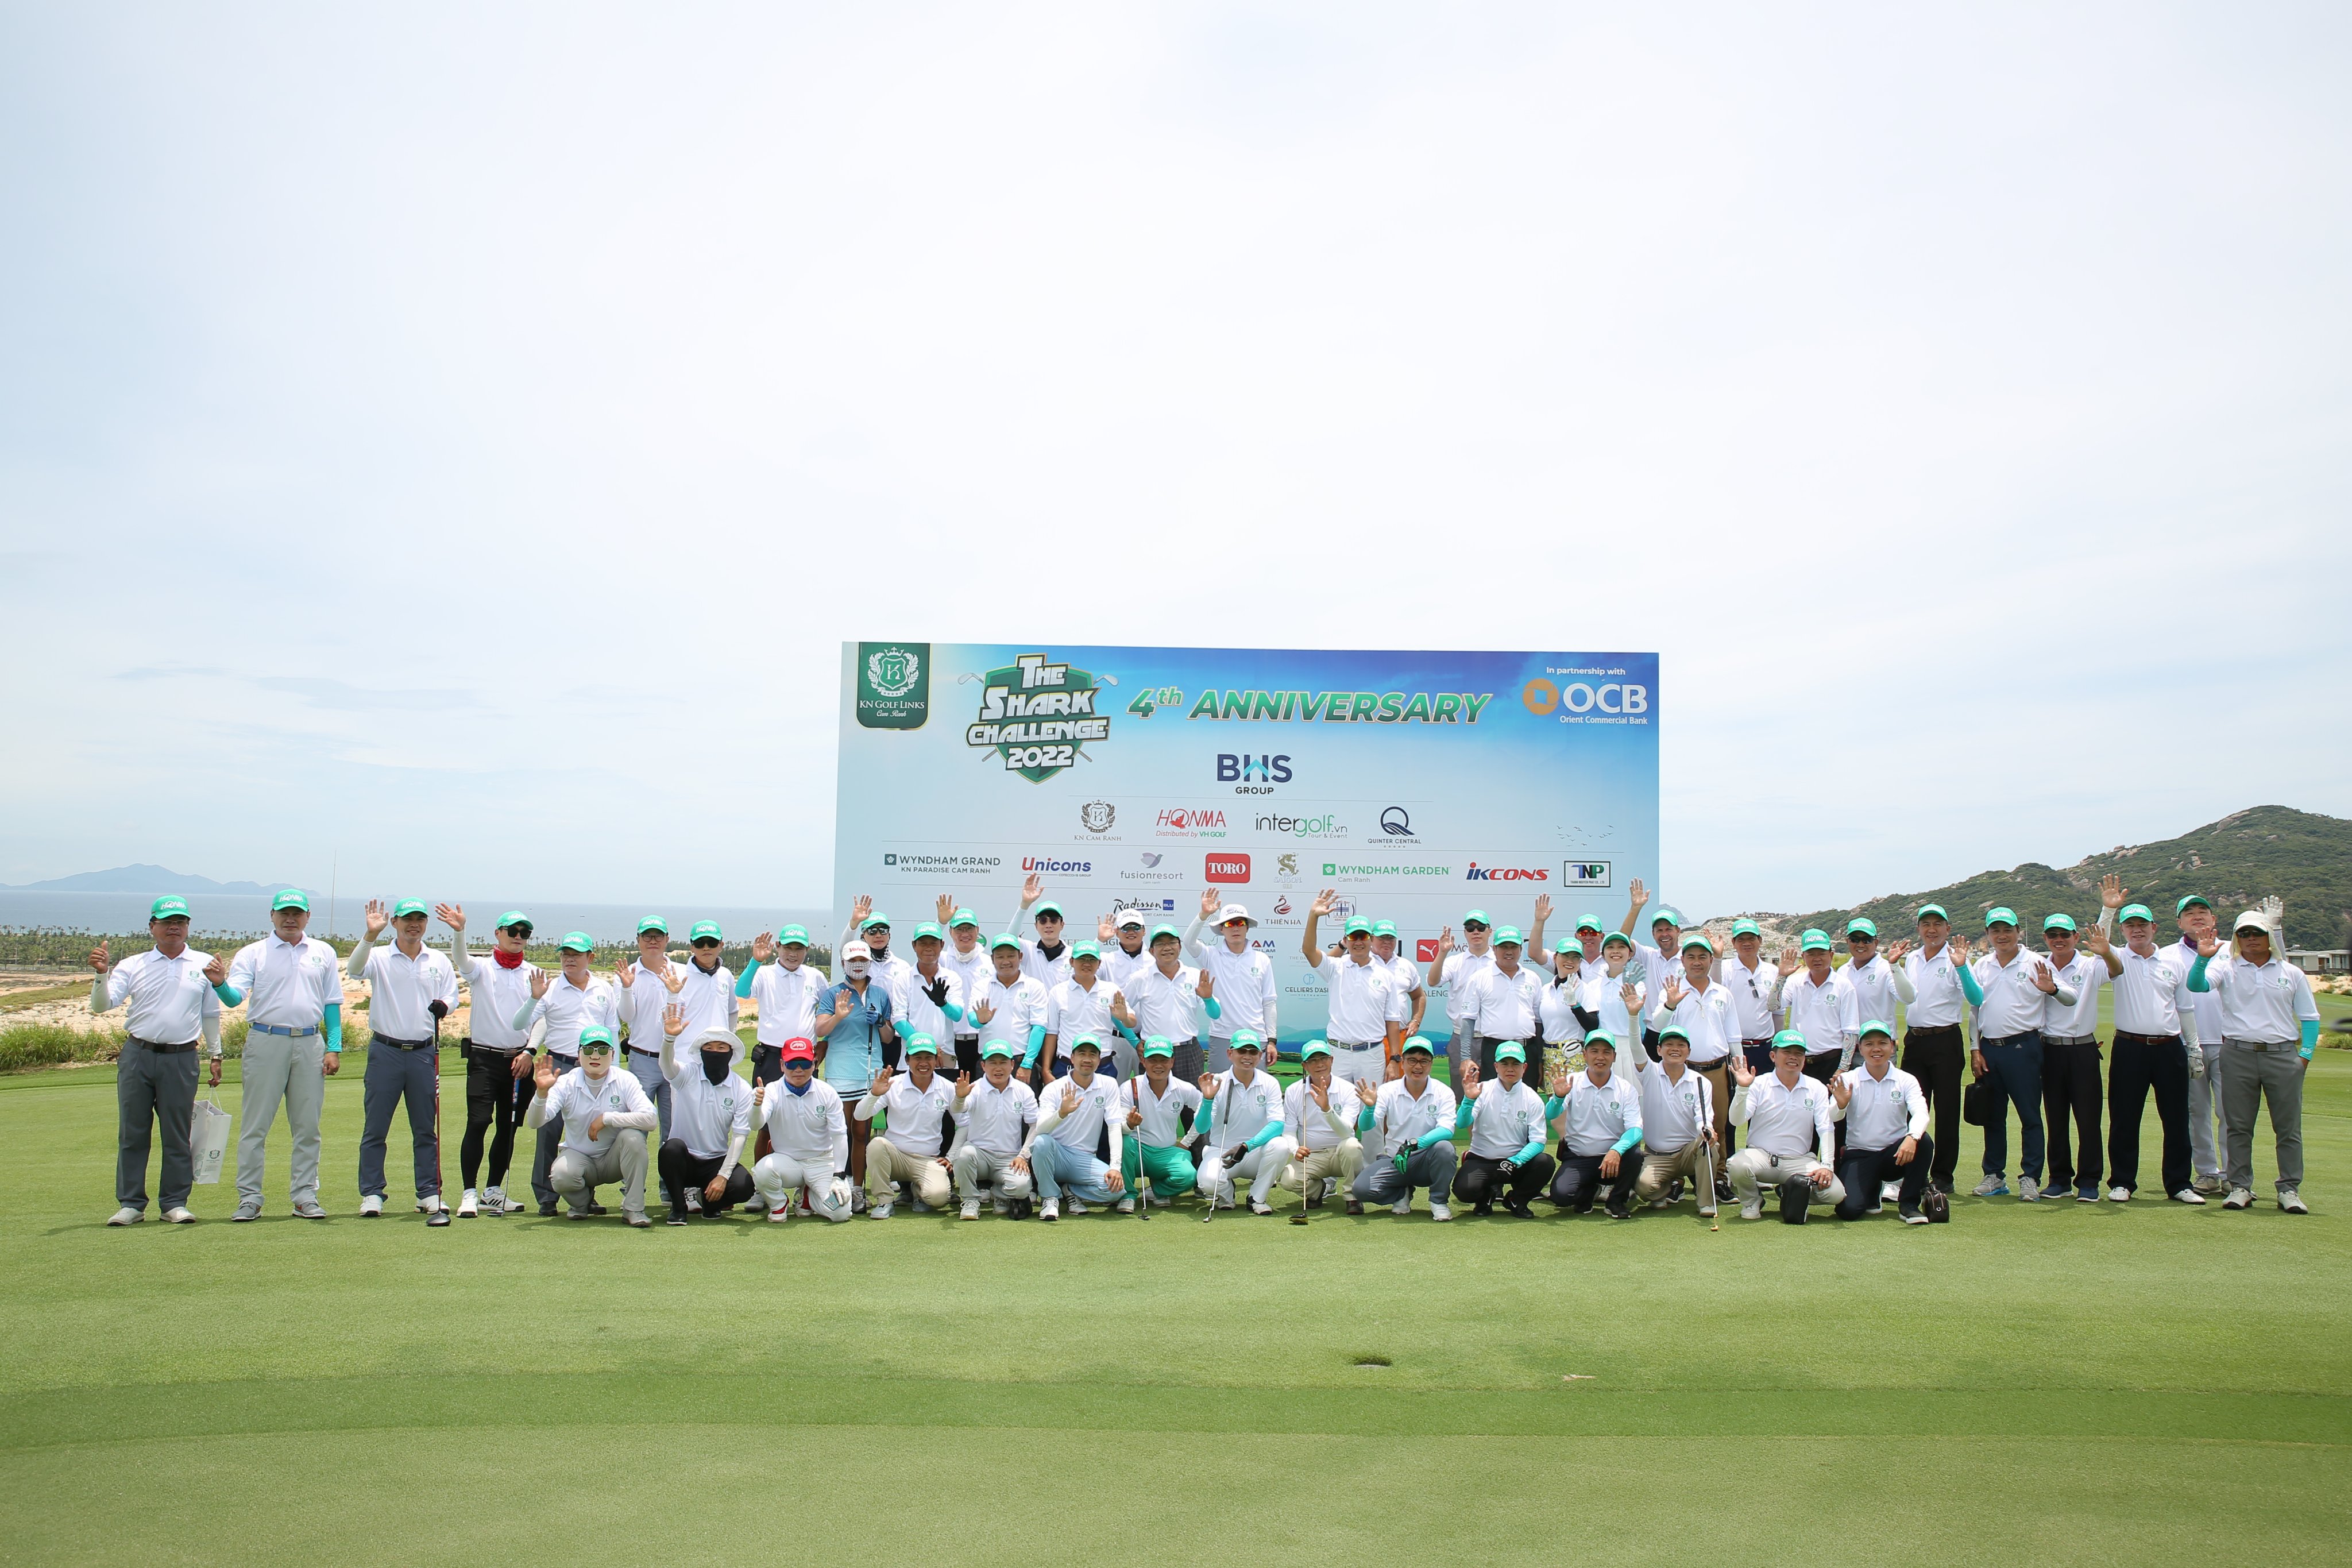 KN Golf Links has organized The Shark Challenge 2022 golf tournament to celebrate the Club's 4th anniversary.